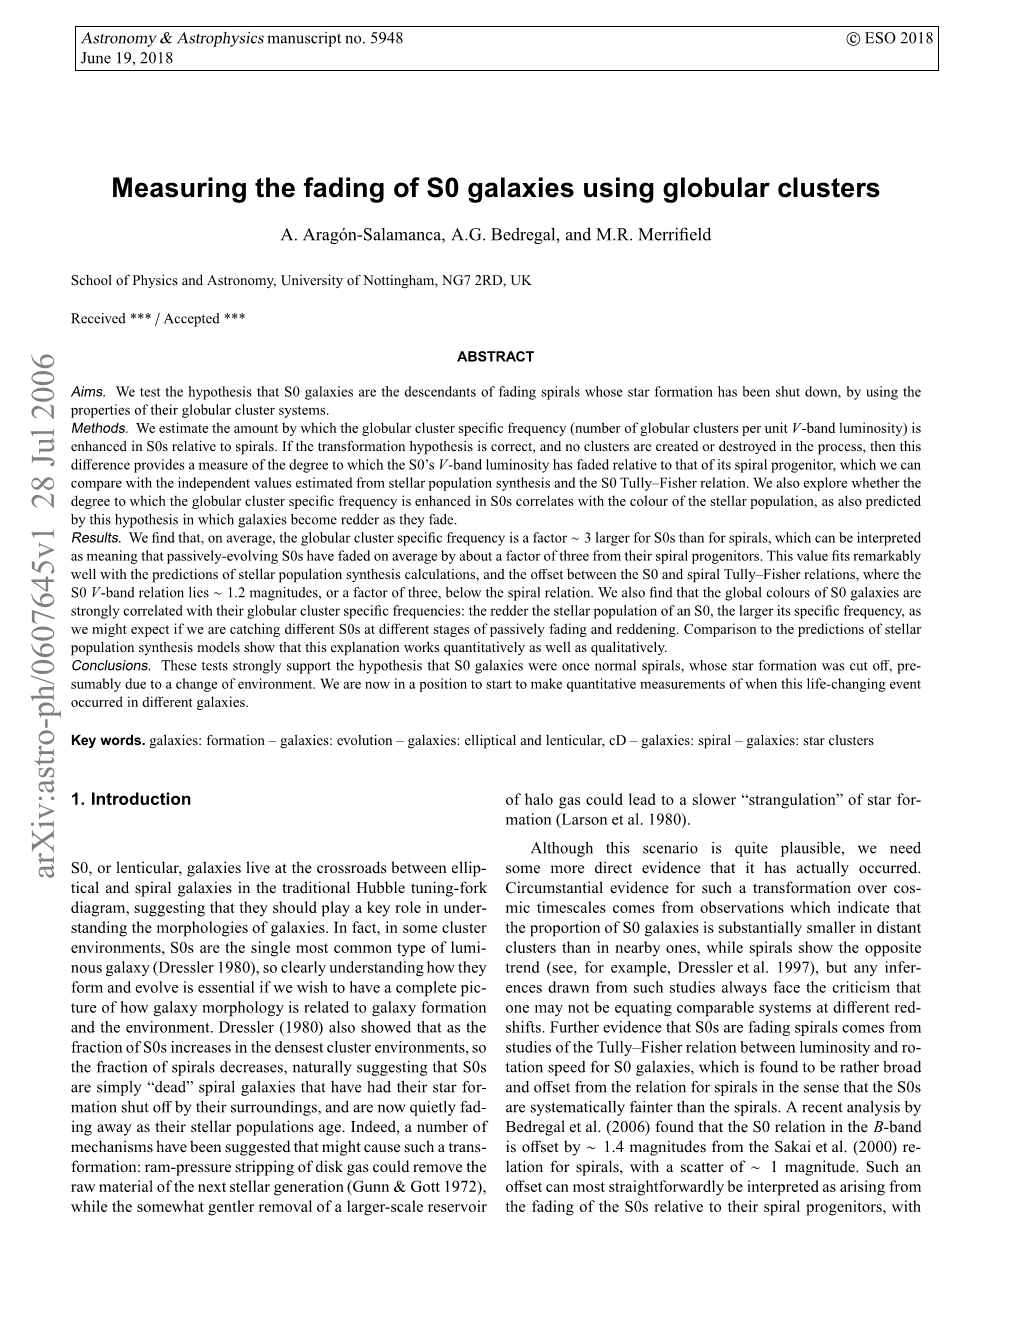 Measuring the Fading of S0 Galaxies Using Globular Clusters the Spread in the Relation Arising from the Diﬀerent Epochs at Table 1